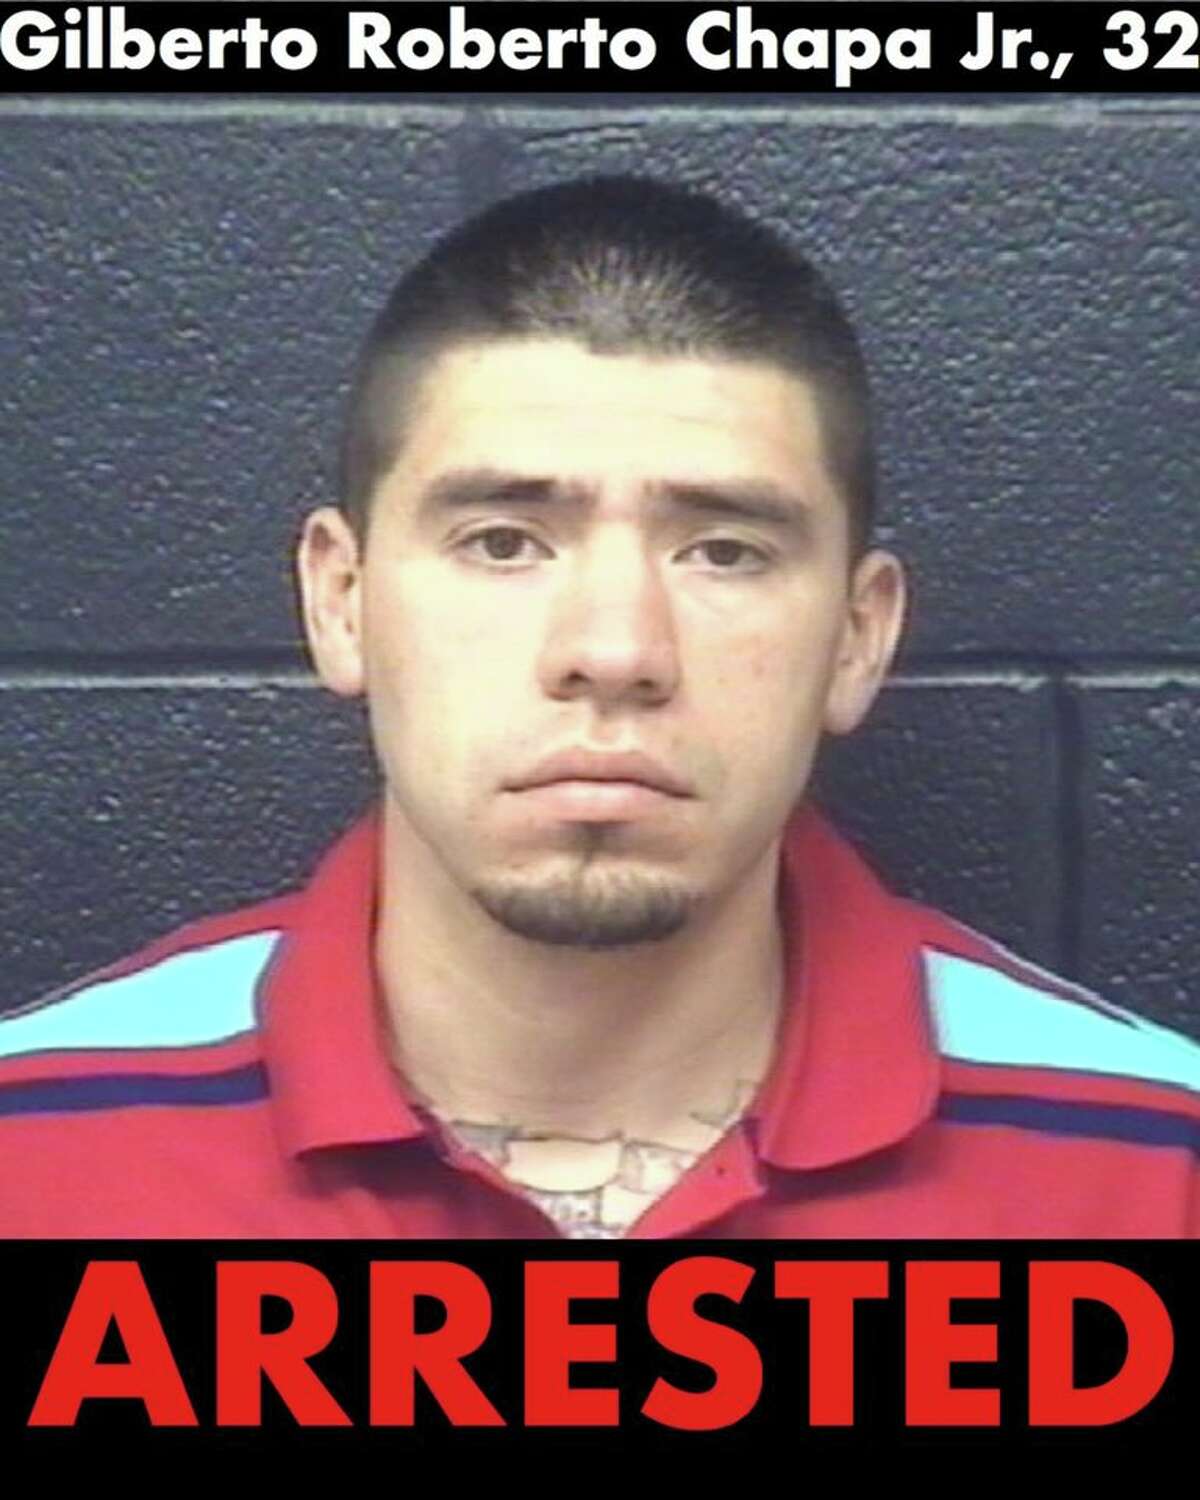 Gilberto Roberto Chapa Jr., 32, was arrested on theft charges.